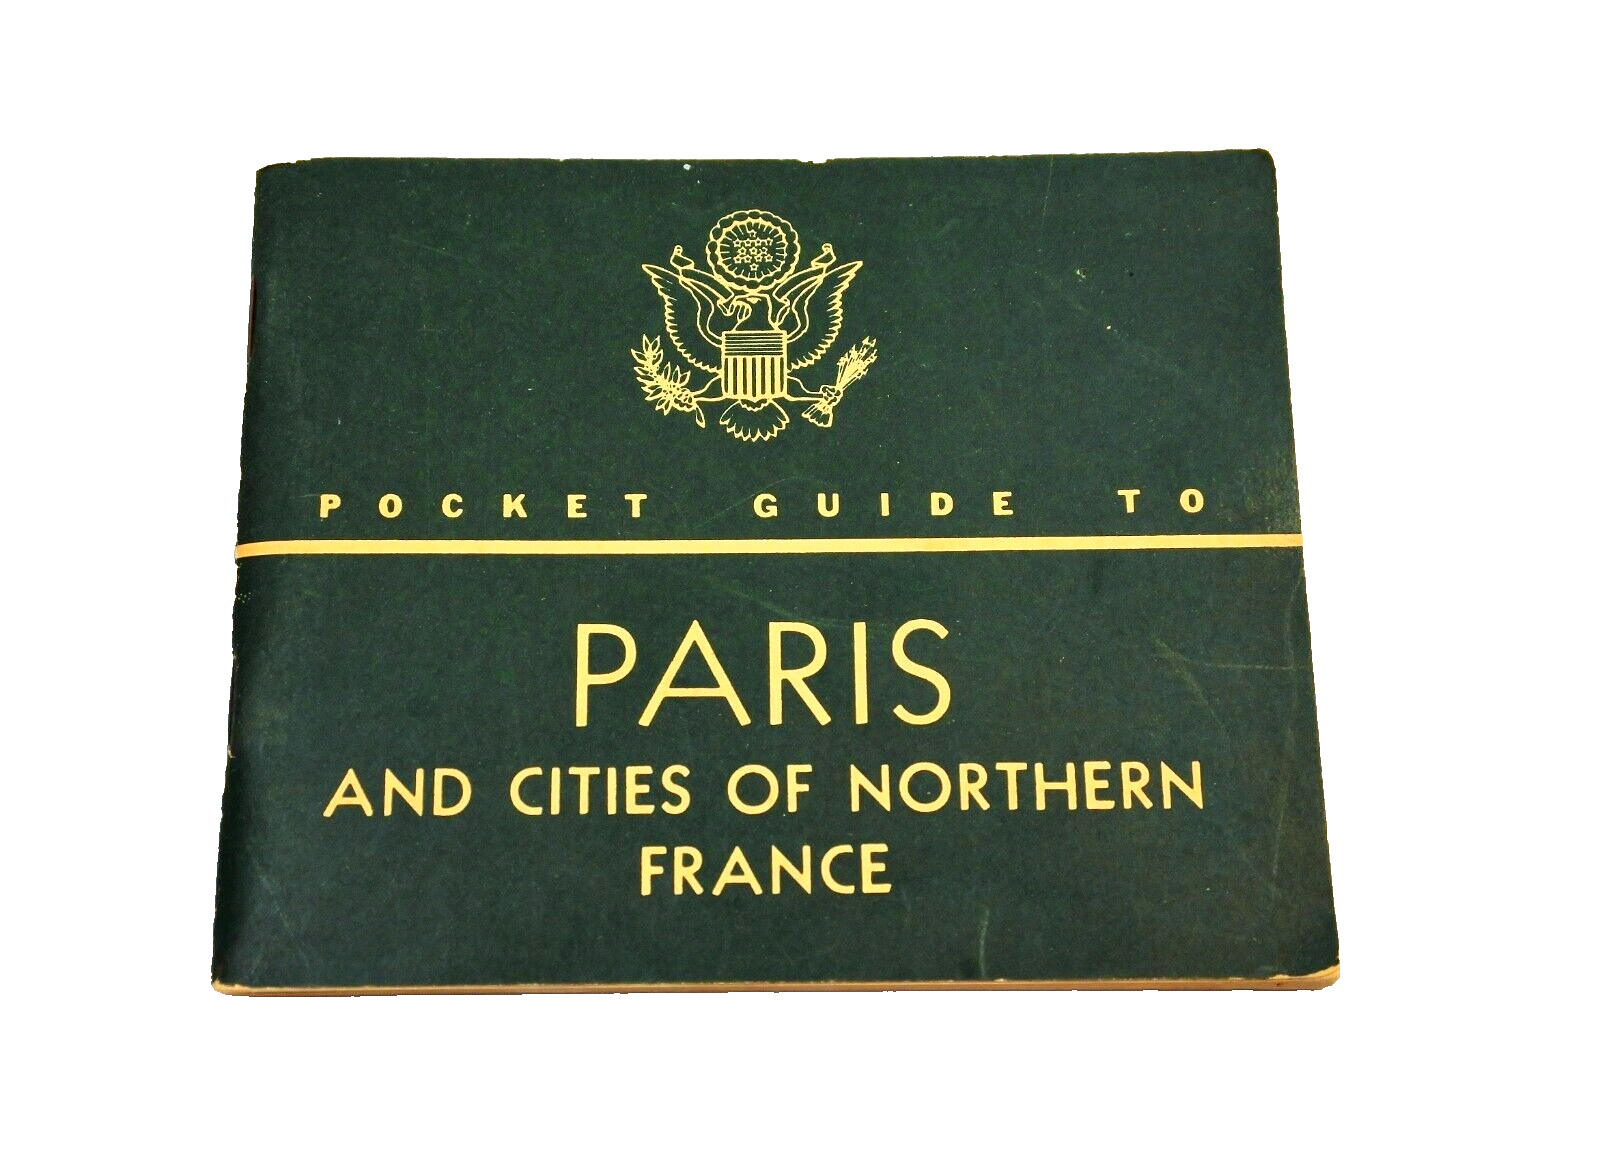 Pocket Guide to PARIS Northern France 1944 U.S. Army